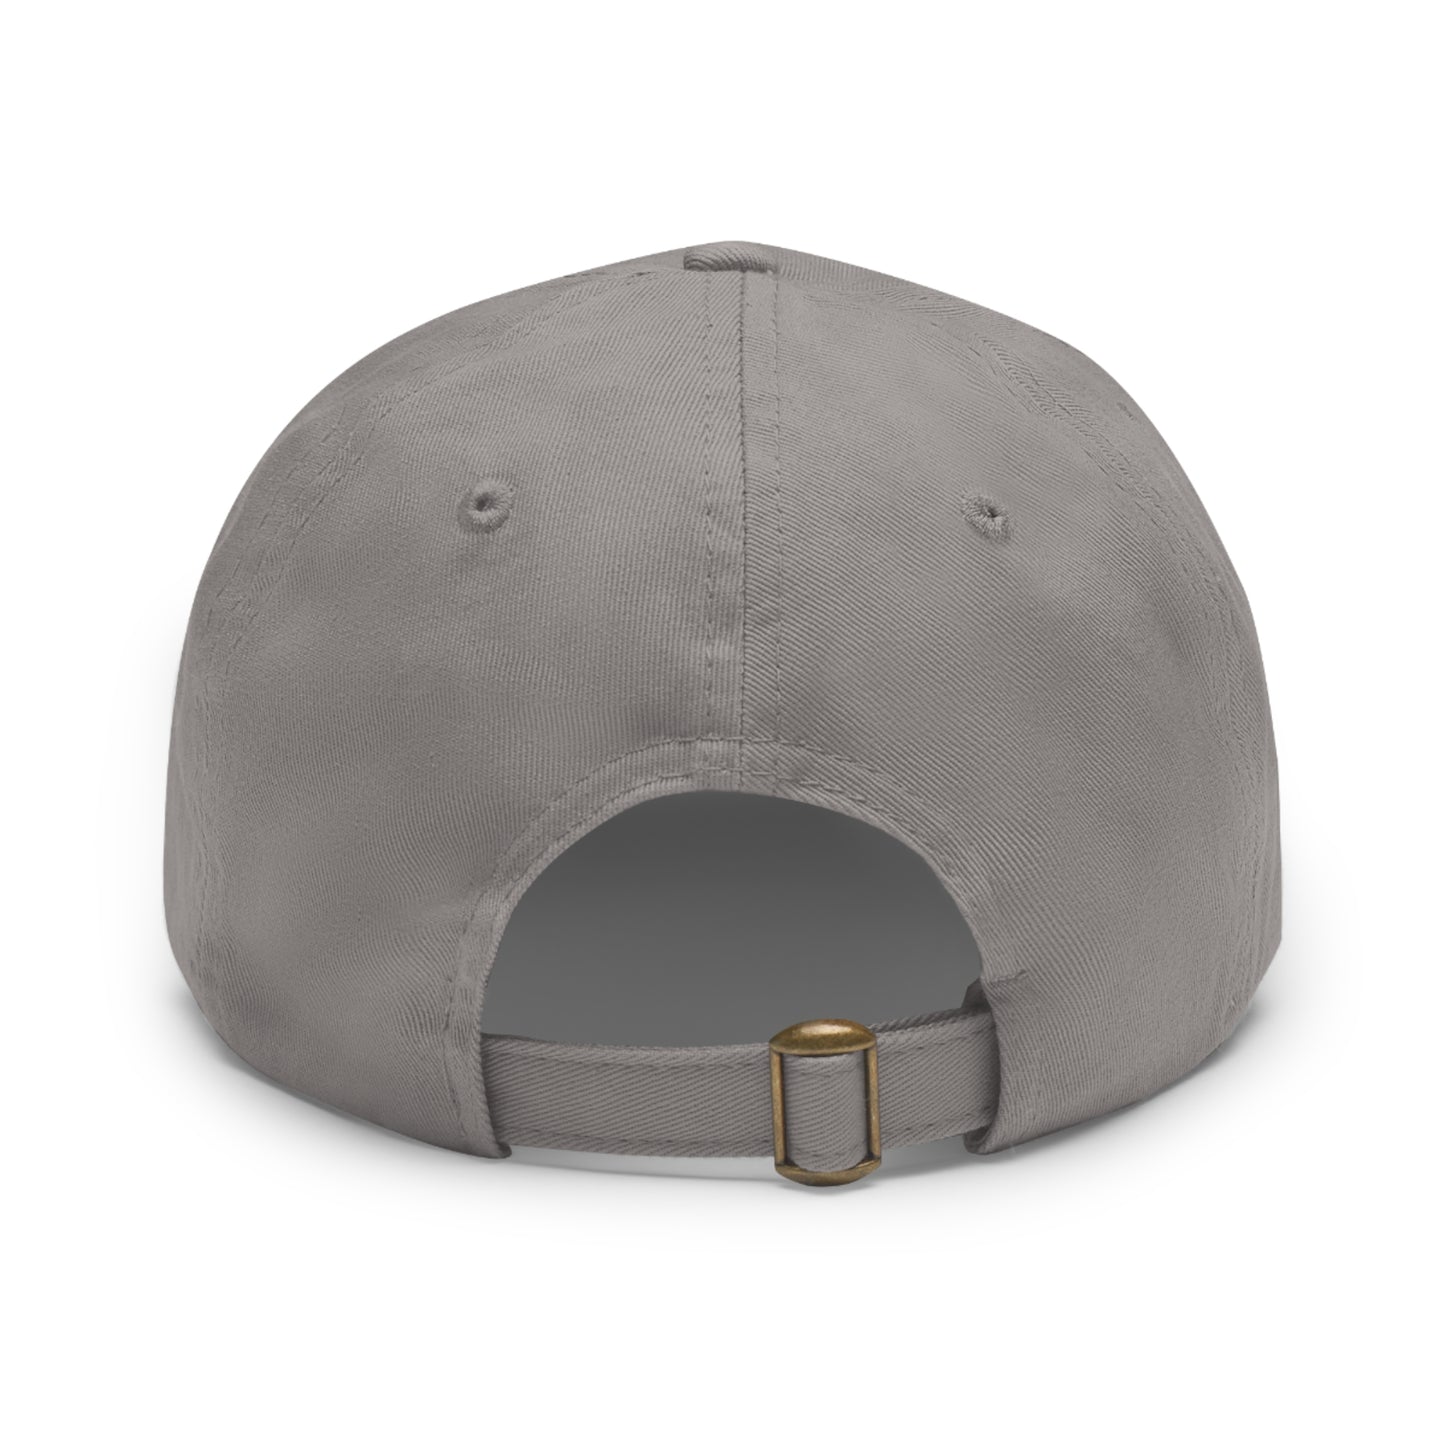 JGMC Dad Hat with Leather Patch (Rectangle)